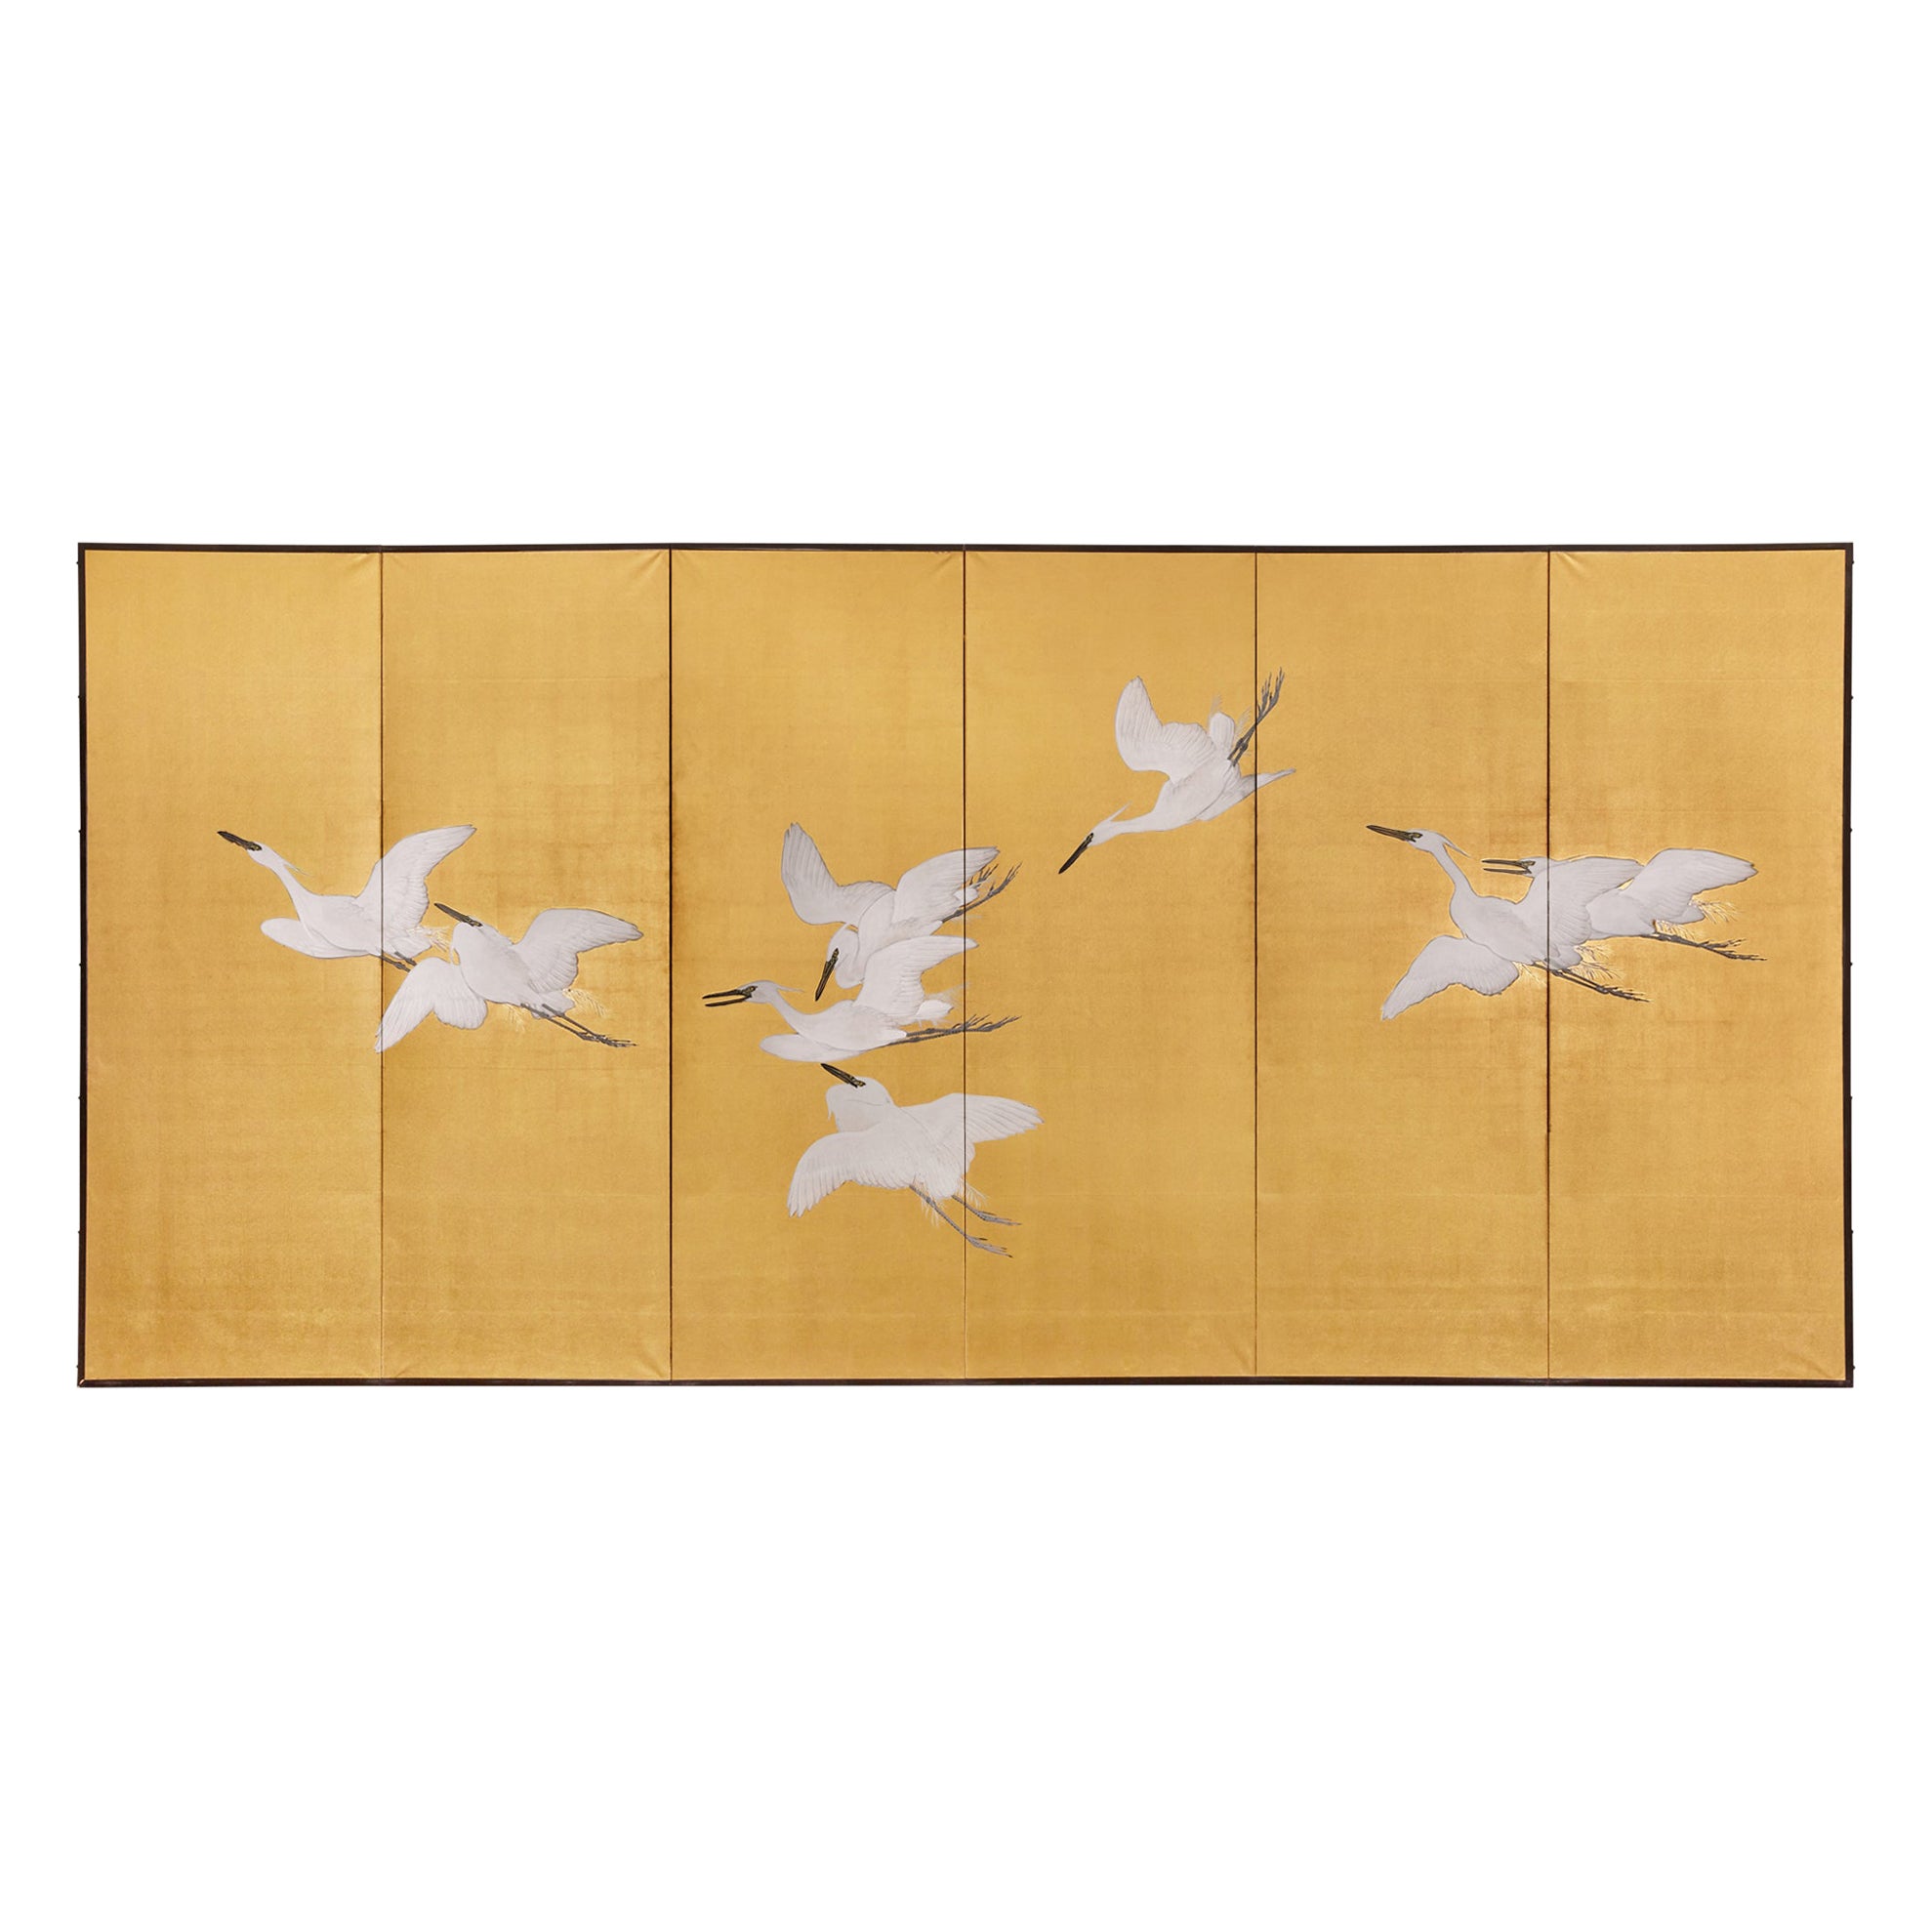 Japanese Six Panel Screen: Egrets in Flight For Sale